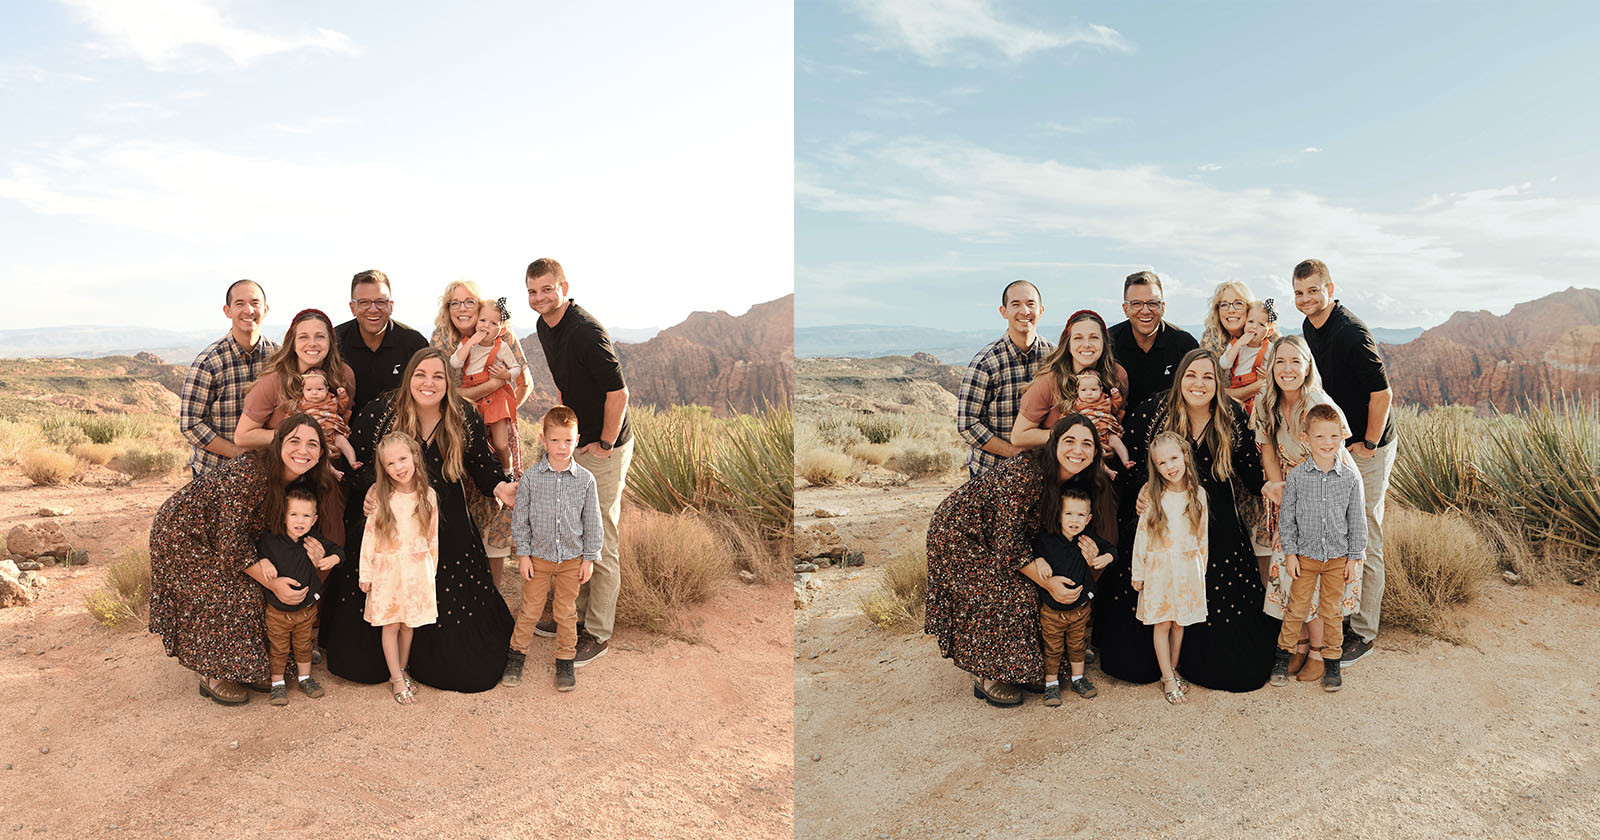  how photographer photoshopped herself into her family portrait 